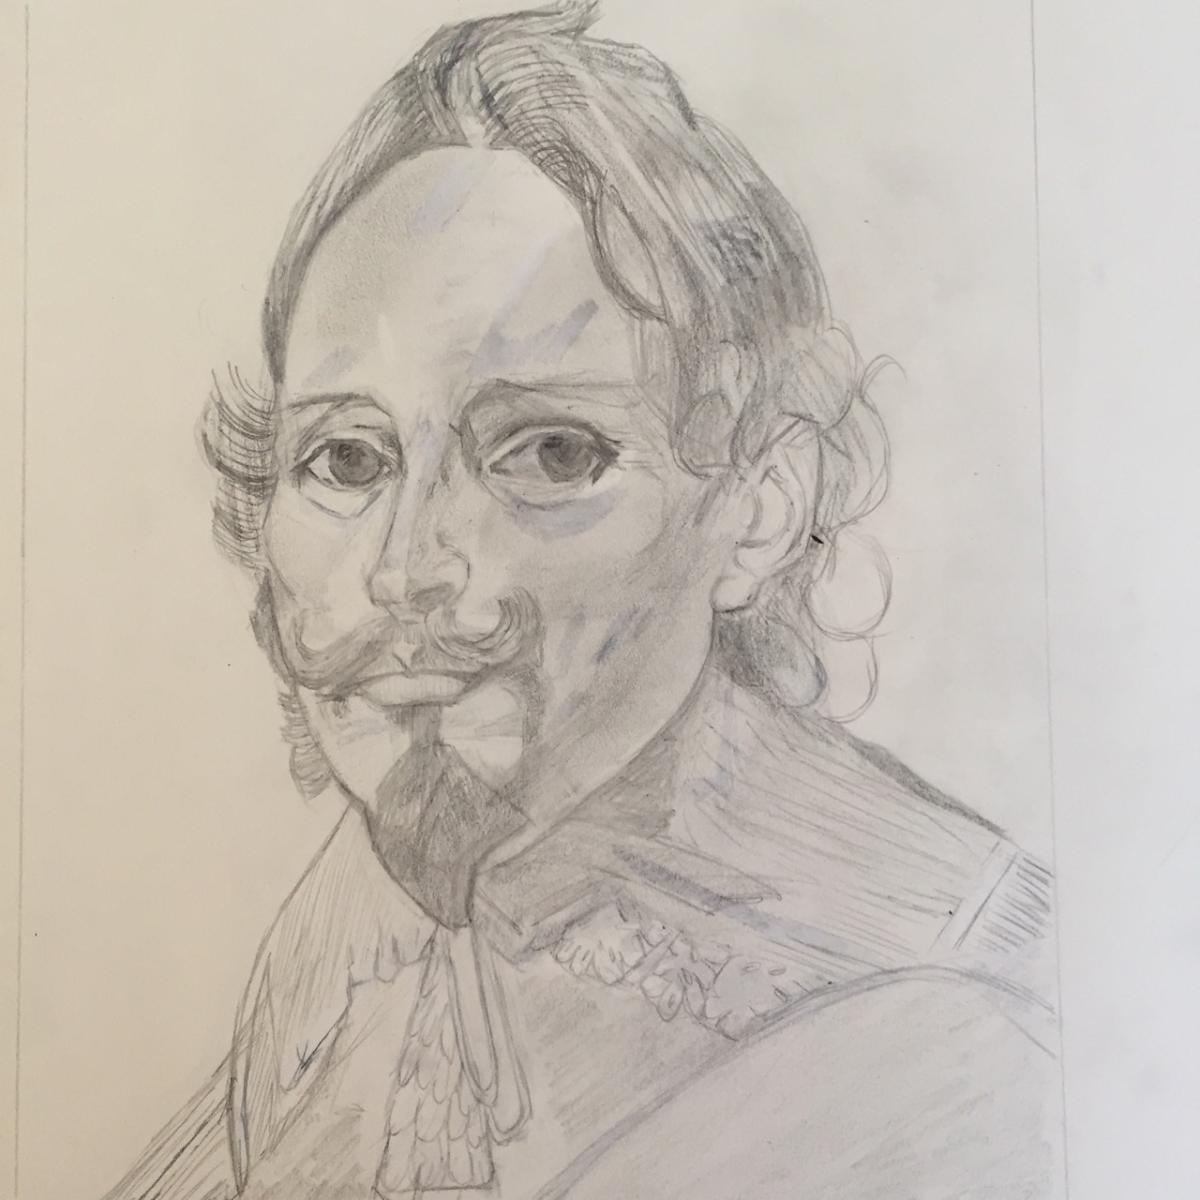 Study of "Anthony Van Dyck" Done in Pencil
For Sale $300. : Portraits : Susan Braha Photography and Fine Art